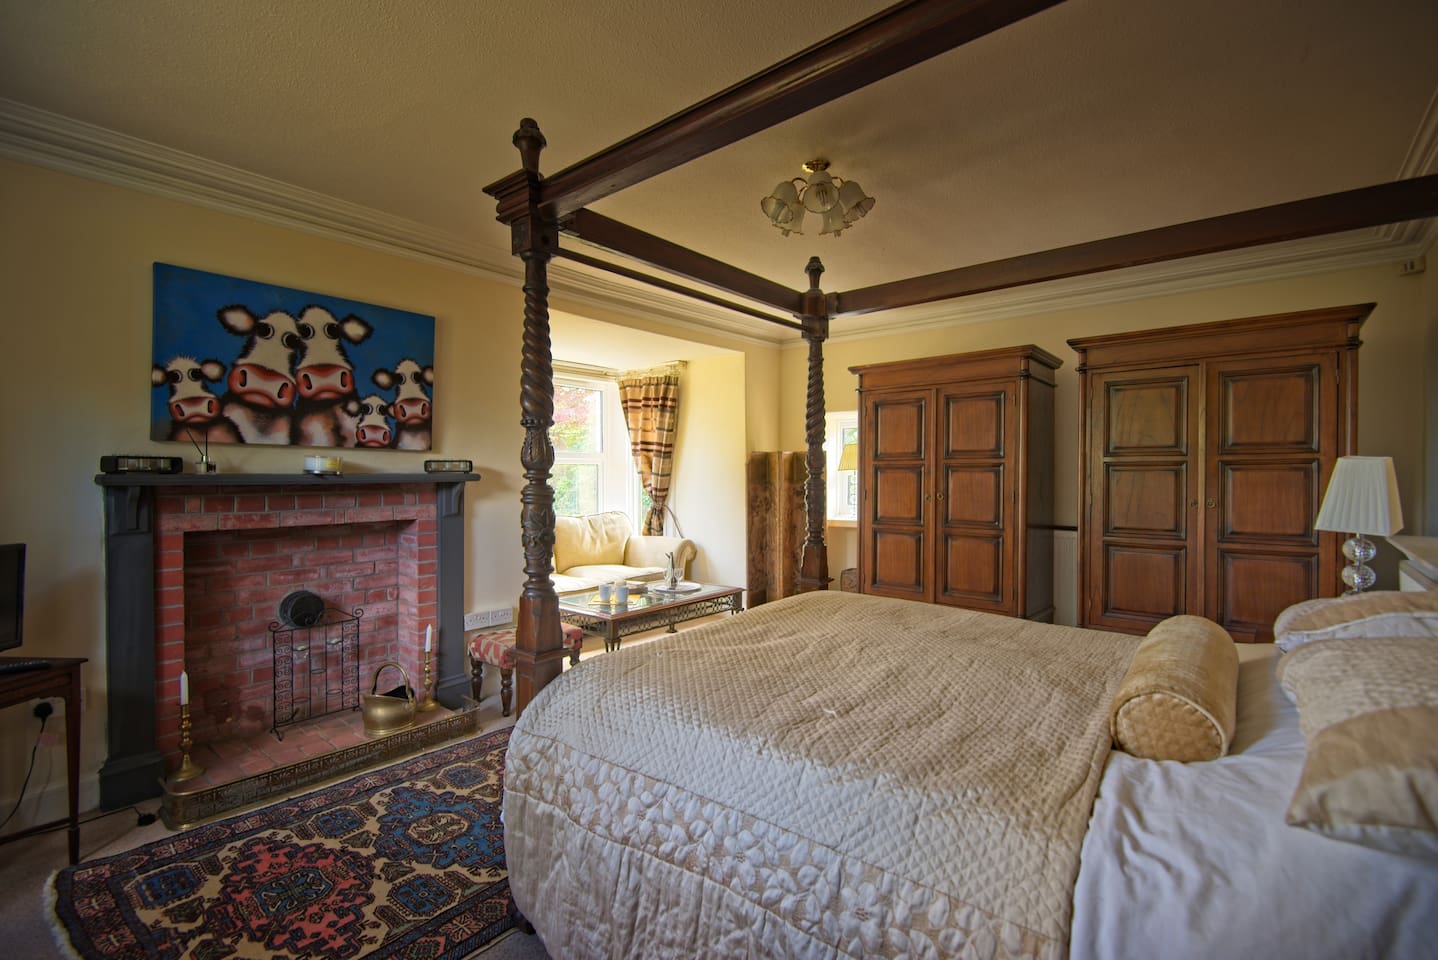 The deluxe room